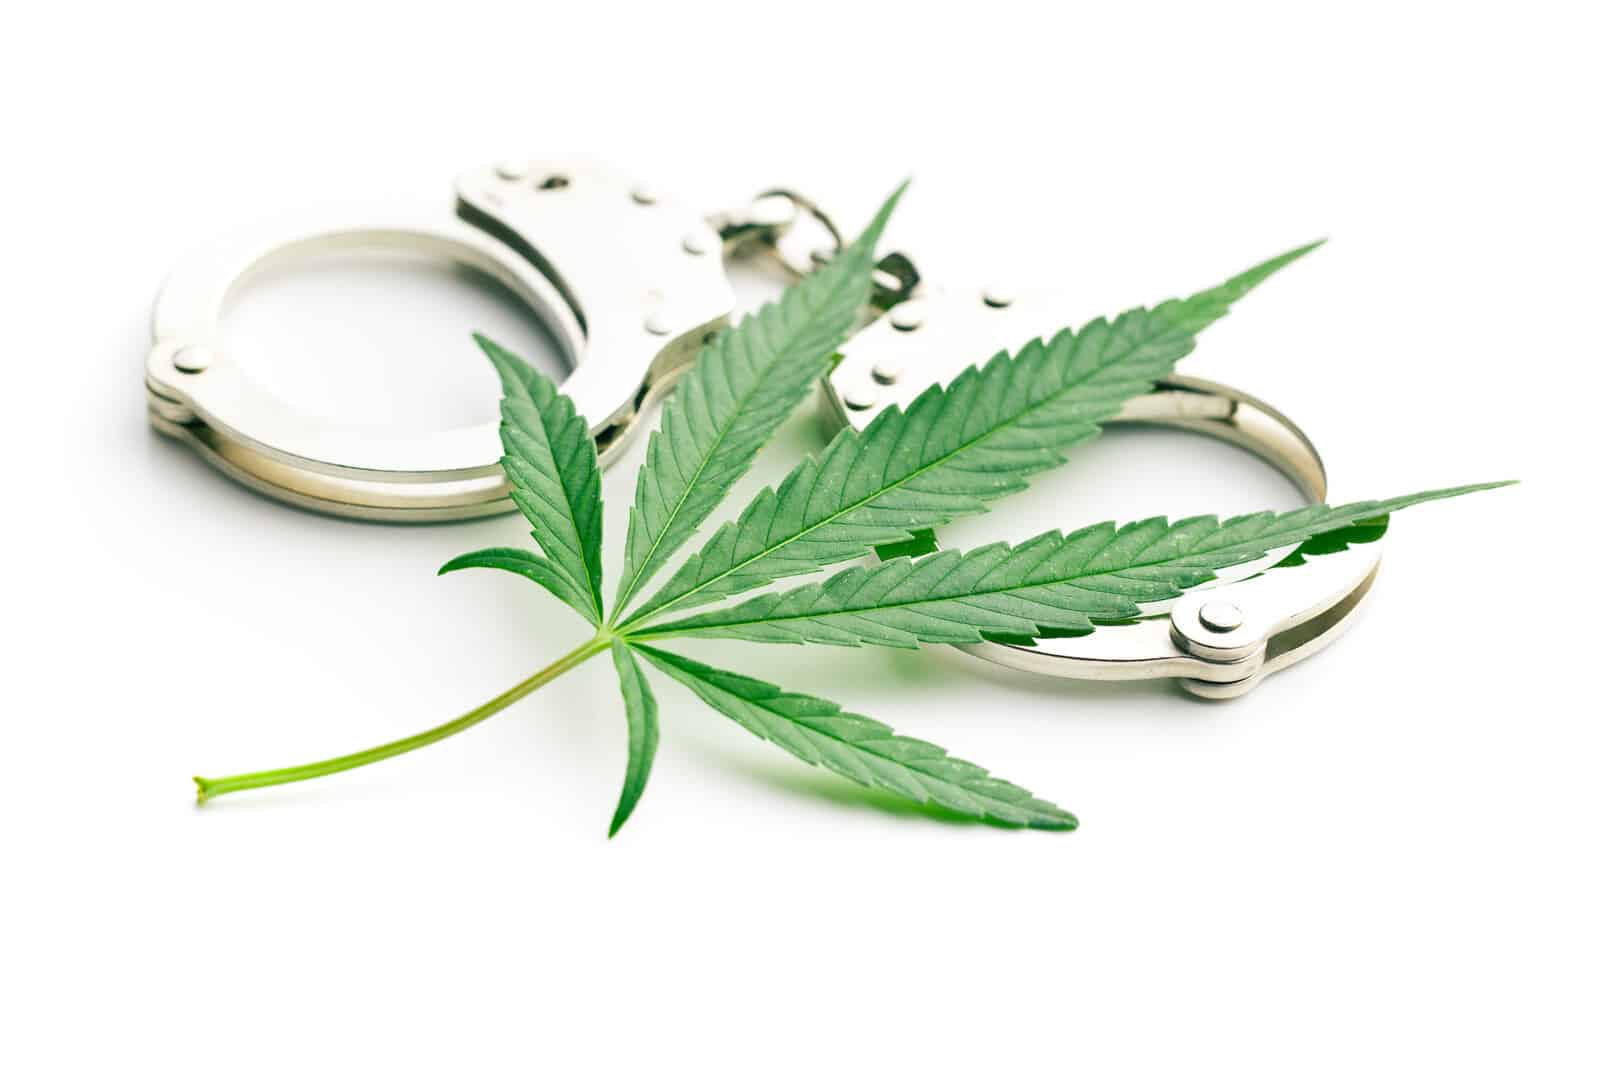 cannabis leaf on top of handcuffs, Biden pardons federal cannabis possession convictions